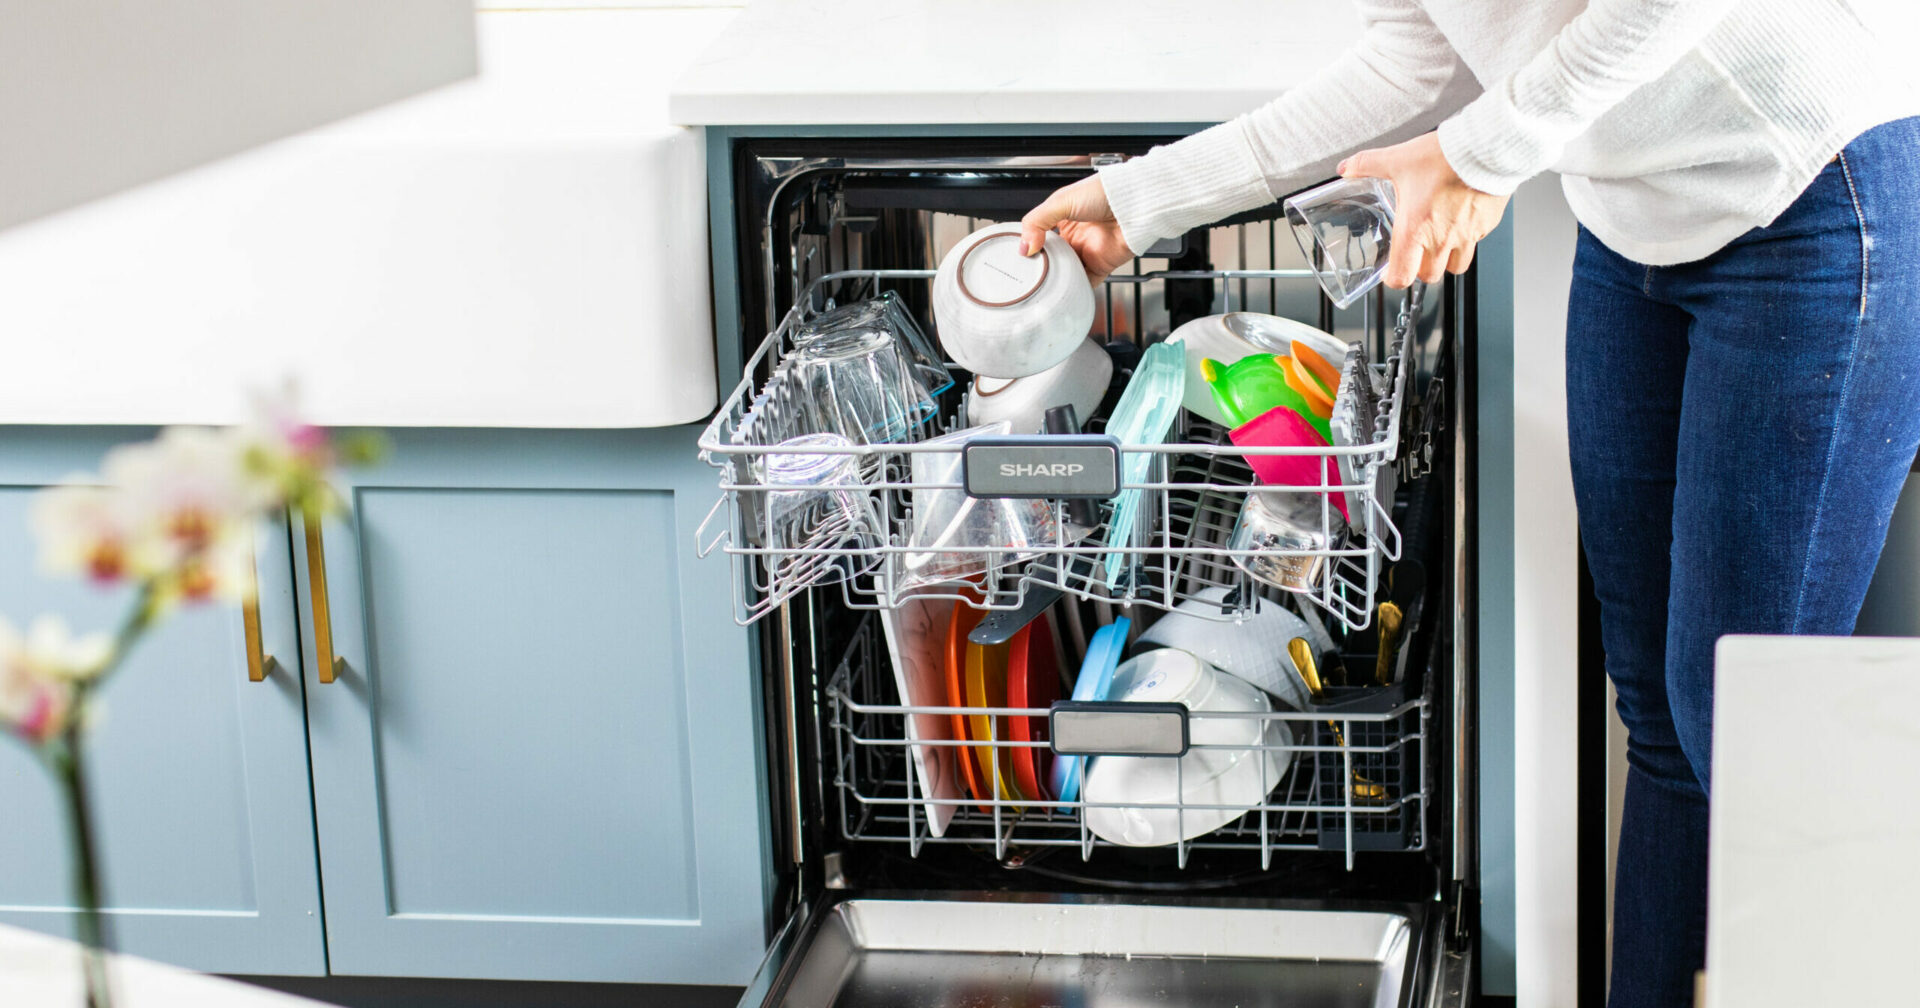 Your Dishwasher Could Be Damaging Your Baking Sheets. Here's How